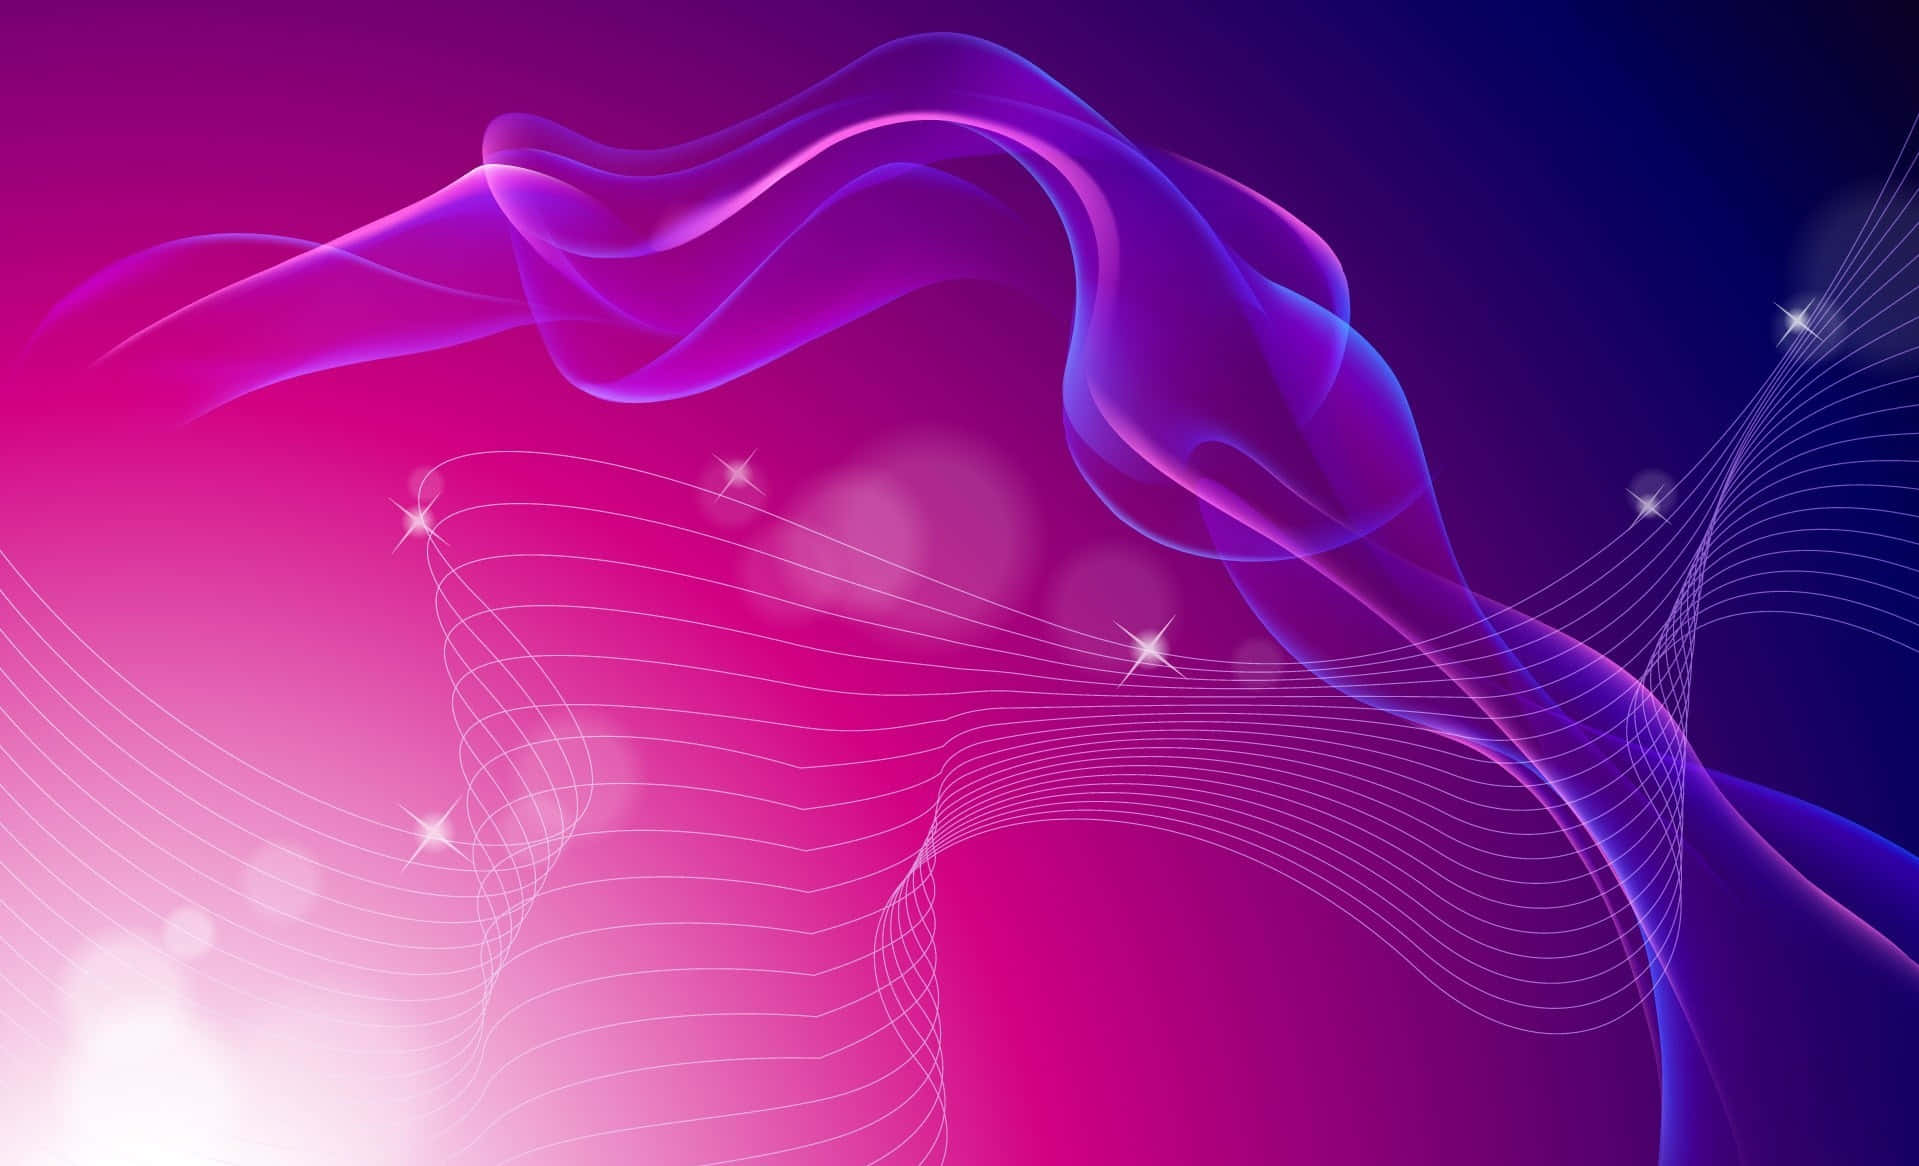 Abstract Background With Purple And Blue Waves